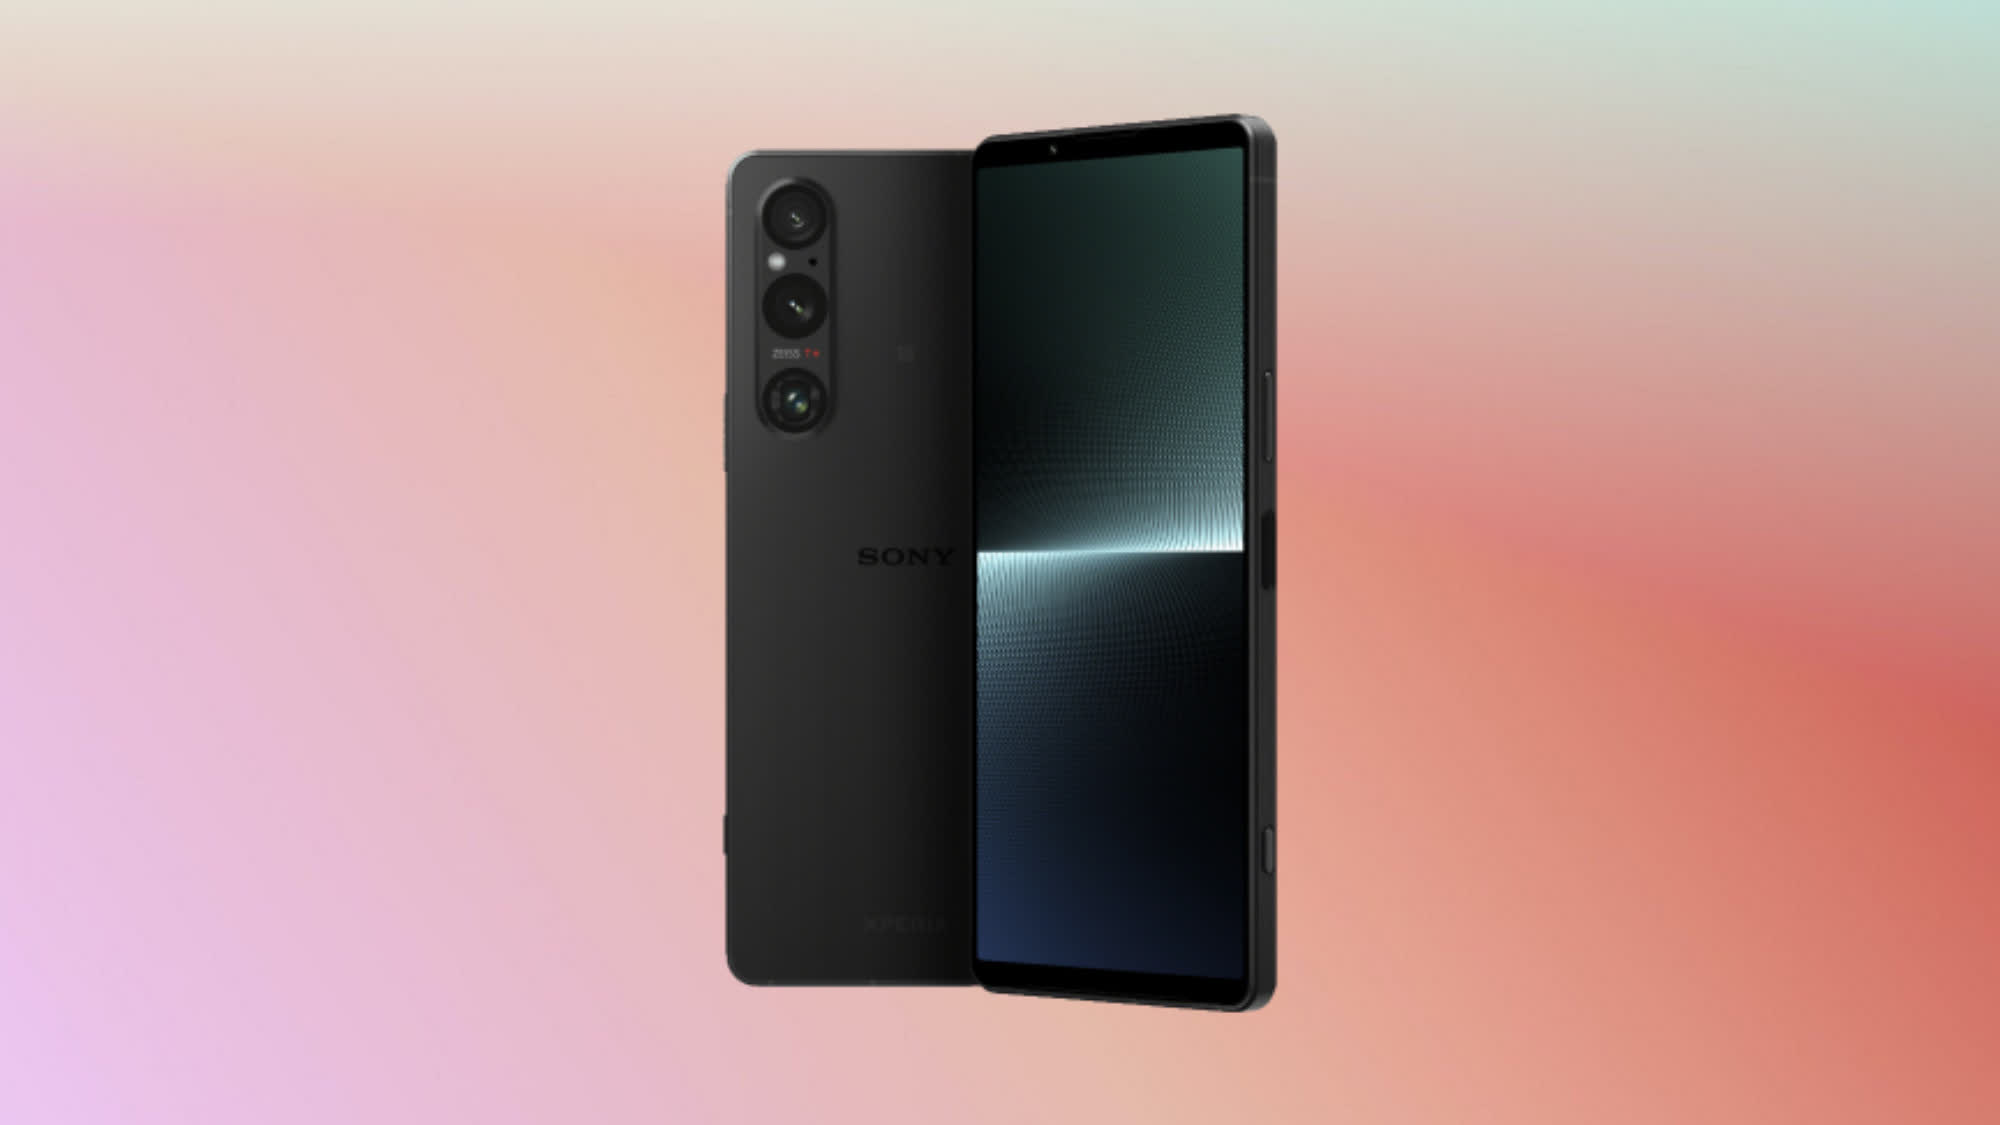 Sony unveils Xperia I V flagship smartphone with 4K HDR Display, Exmor T Image Sensor